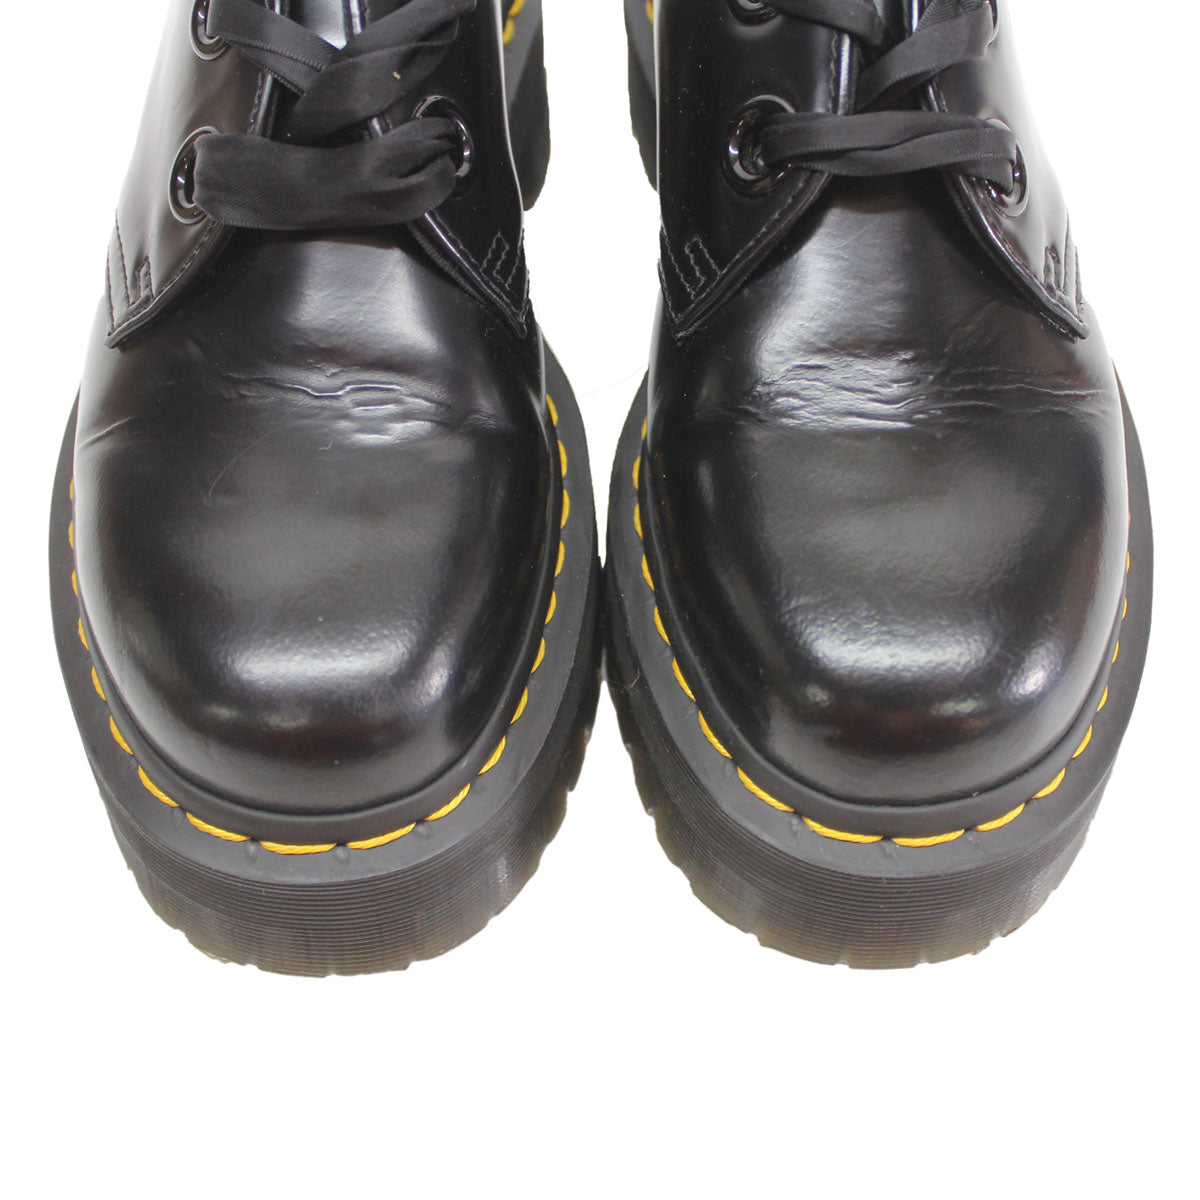 Dr. Martens Womens Holly Buttero Leather Shoes - UK 6